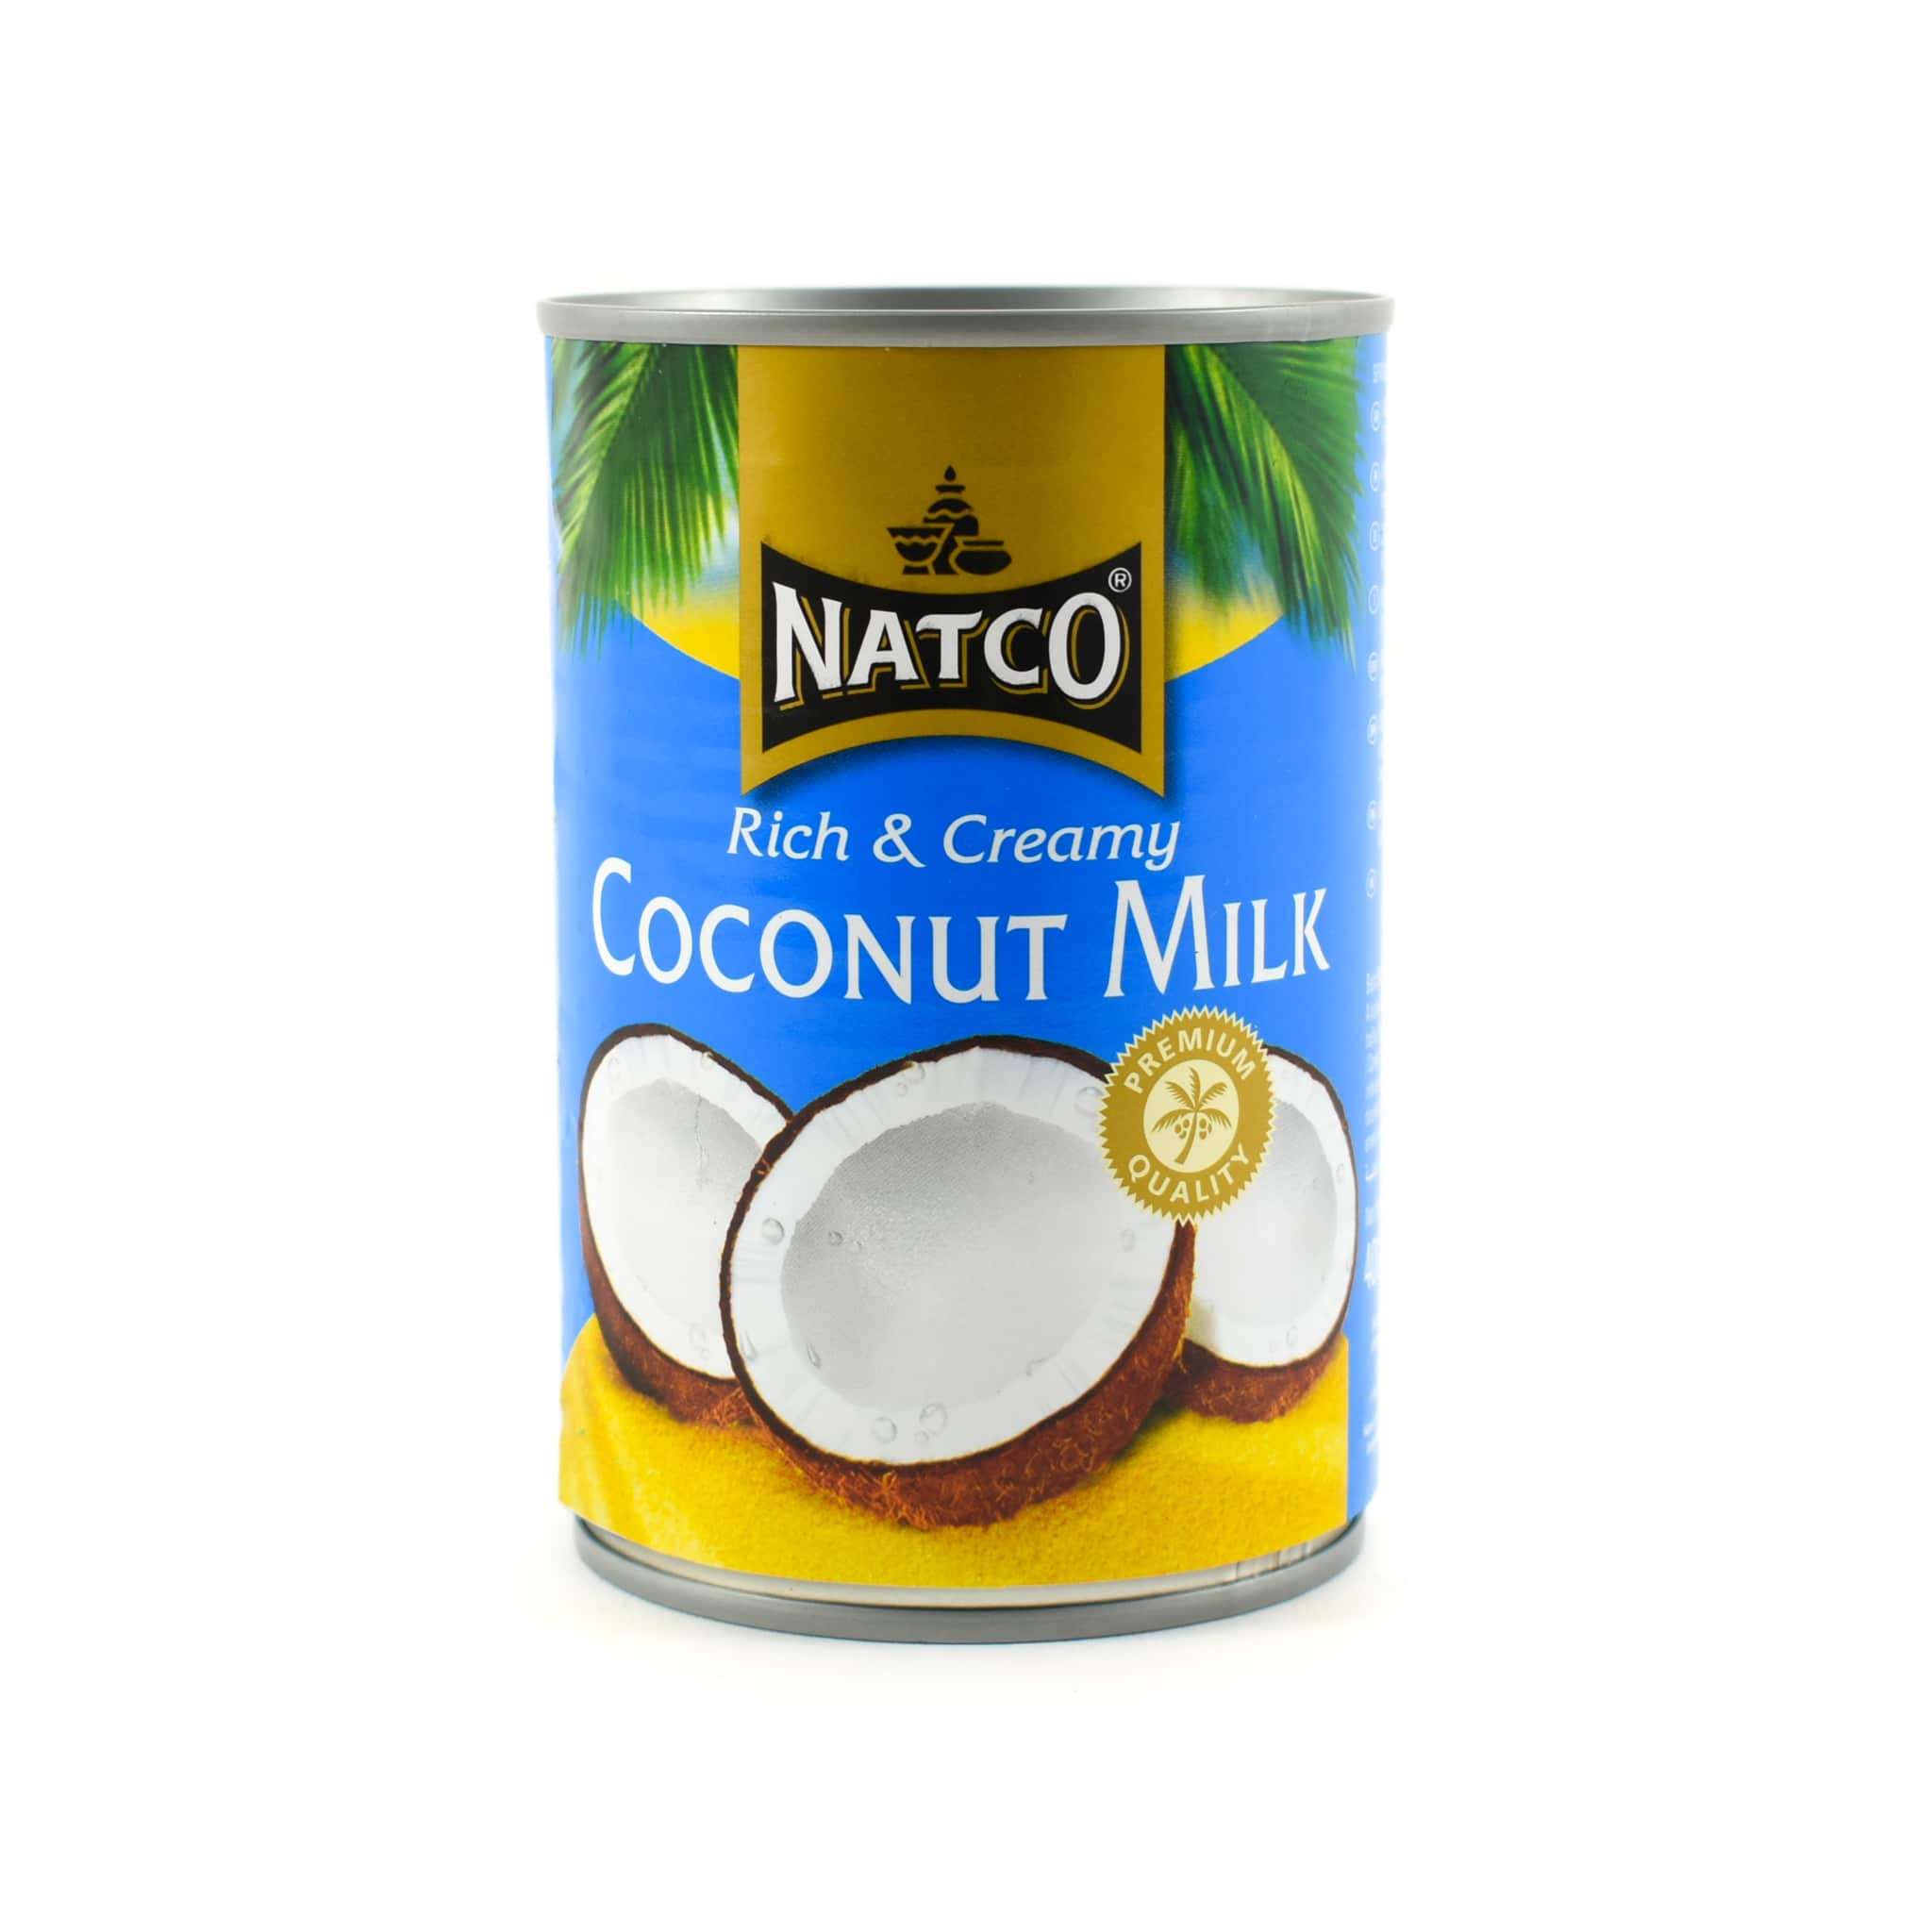 The best Aroy-D Coconut Milk 400ml Ingredients.Buy online at Sous Chef  Online Shop and easy returns